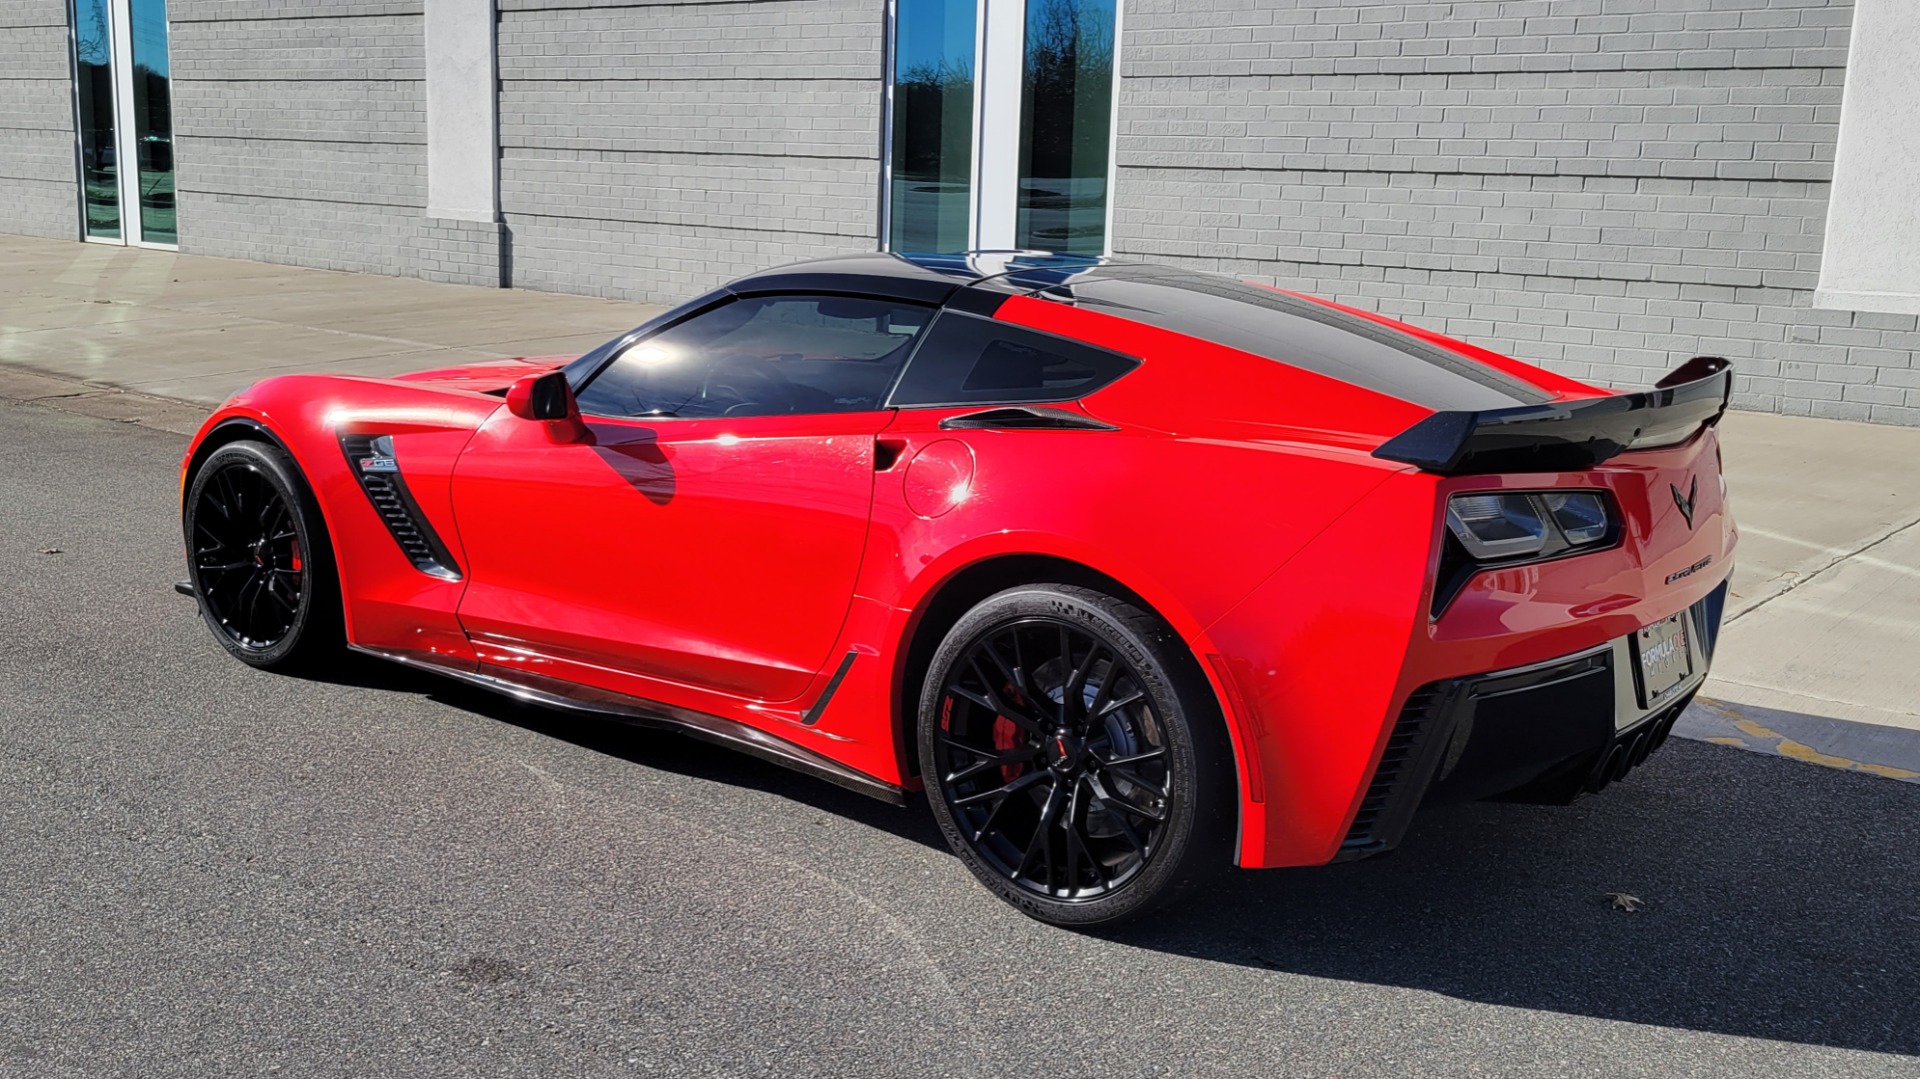 Used 2015 Chevrolet CORVETTE Z06 COUPE 2LZ (650HP+) / NAV / BOSE / PERF DATA RECORDER / REARVIEW for sale $69,500 at Formula Imports in Charlotte NC 28227 5